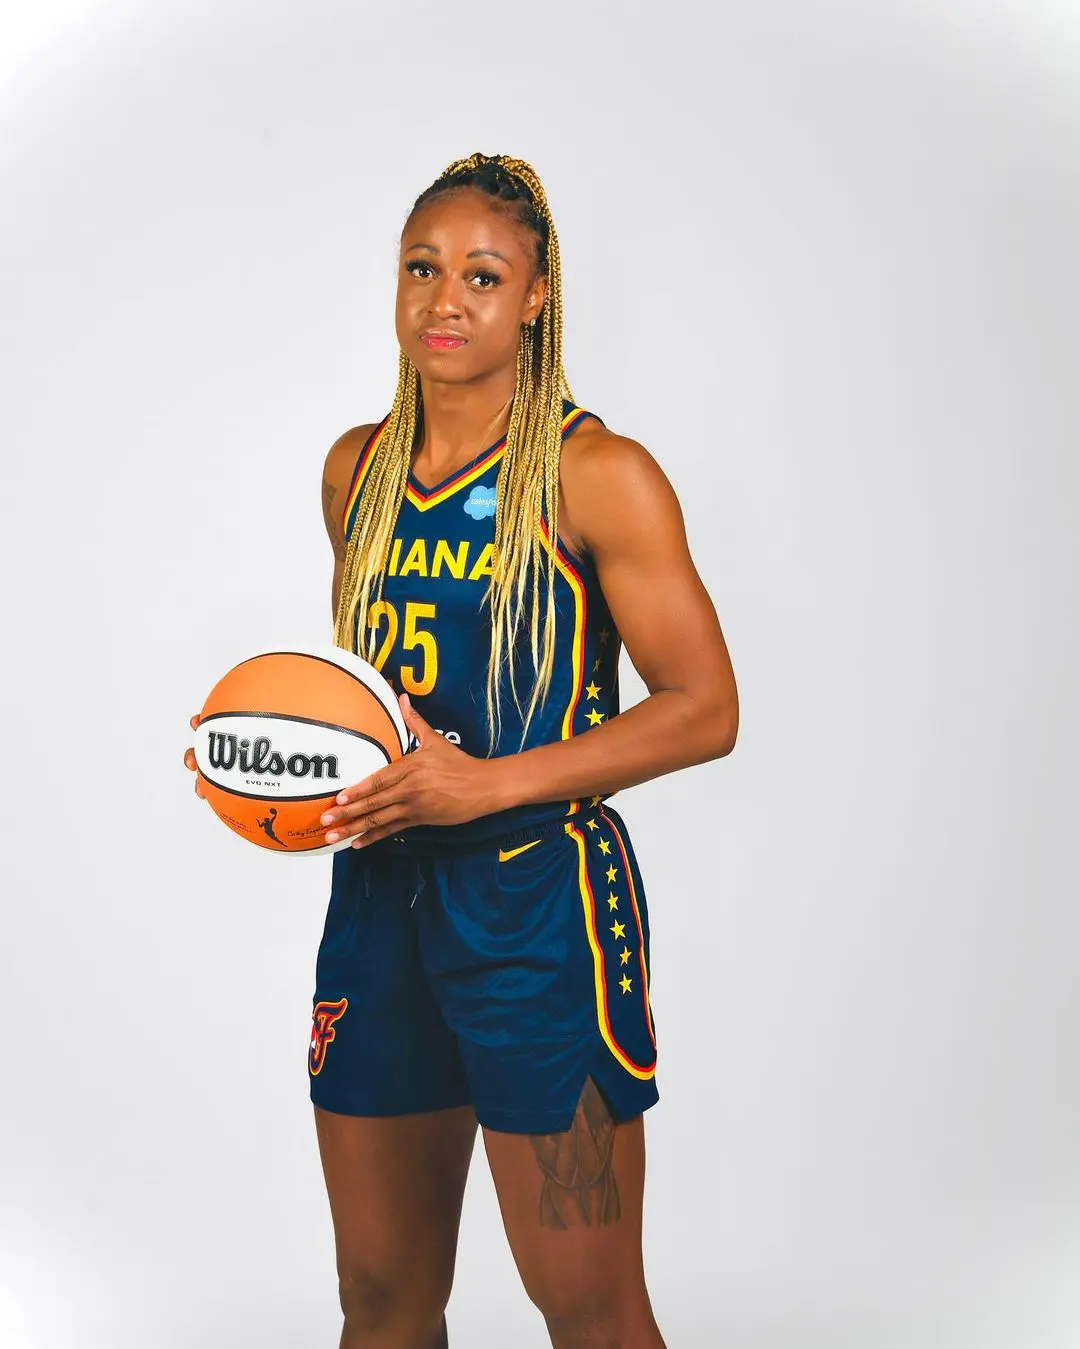 Tiffany Mitchell plays for the Indiana Fever 